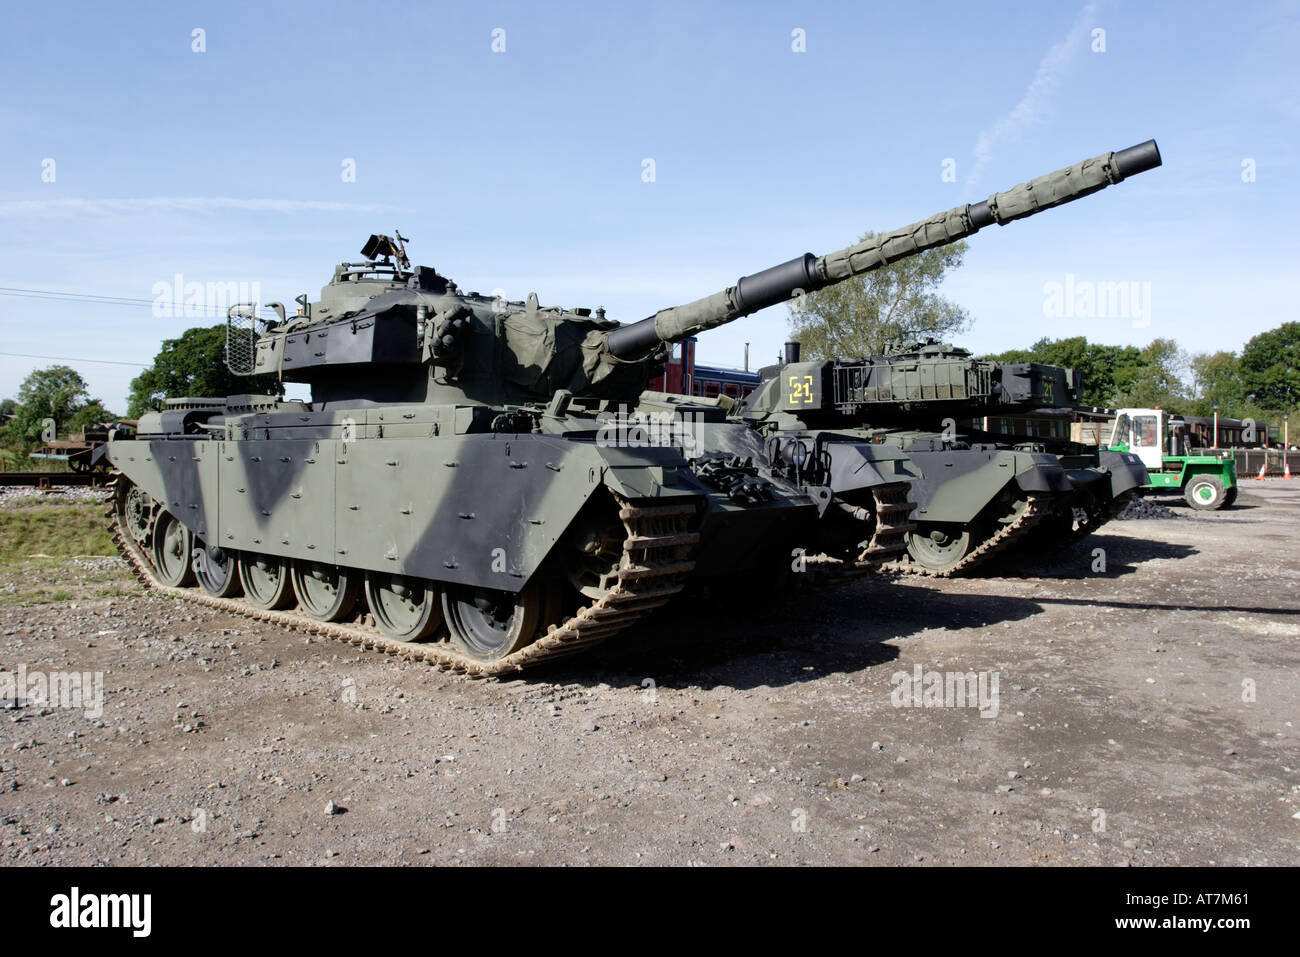 A tank with guns pointing upwards Stock Photo